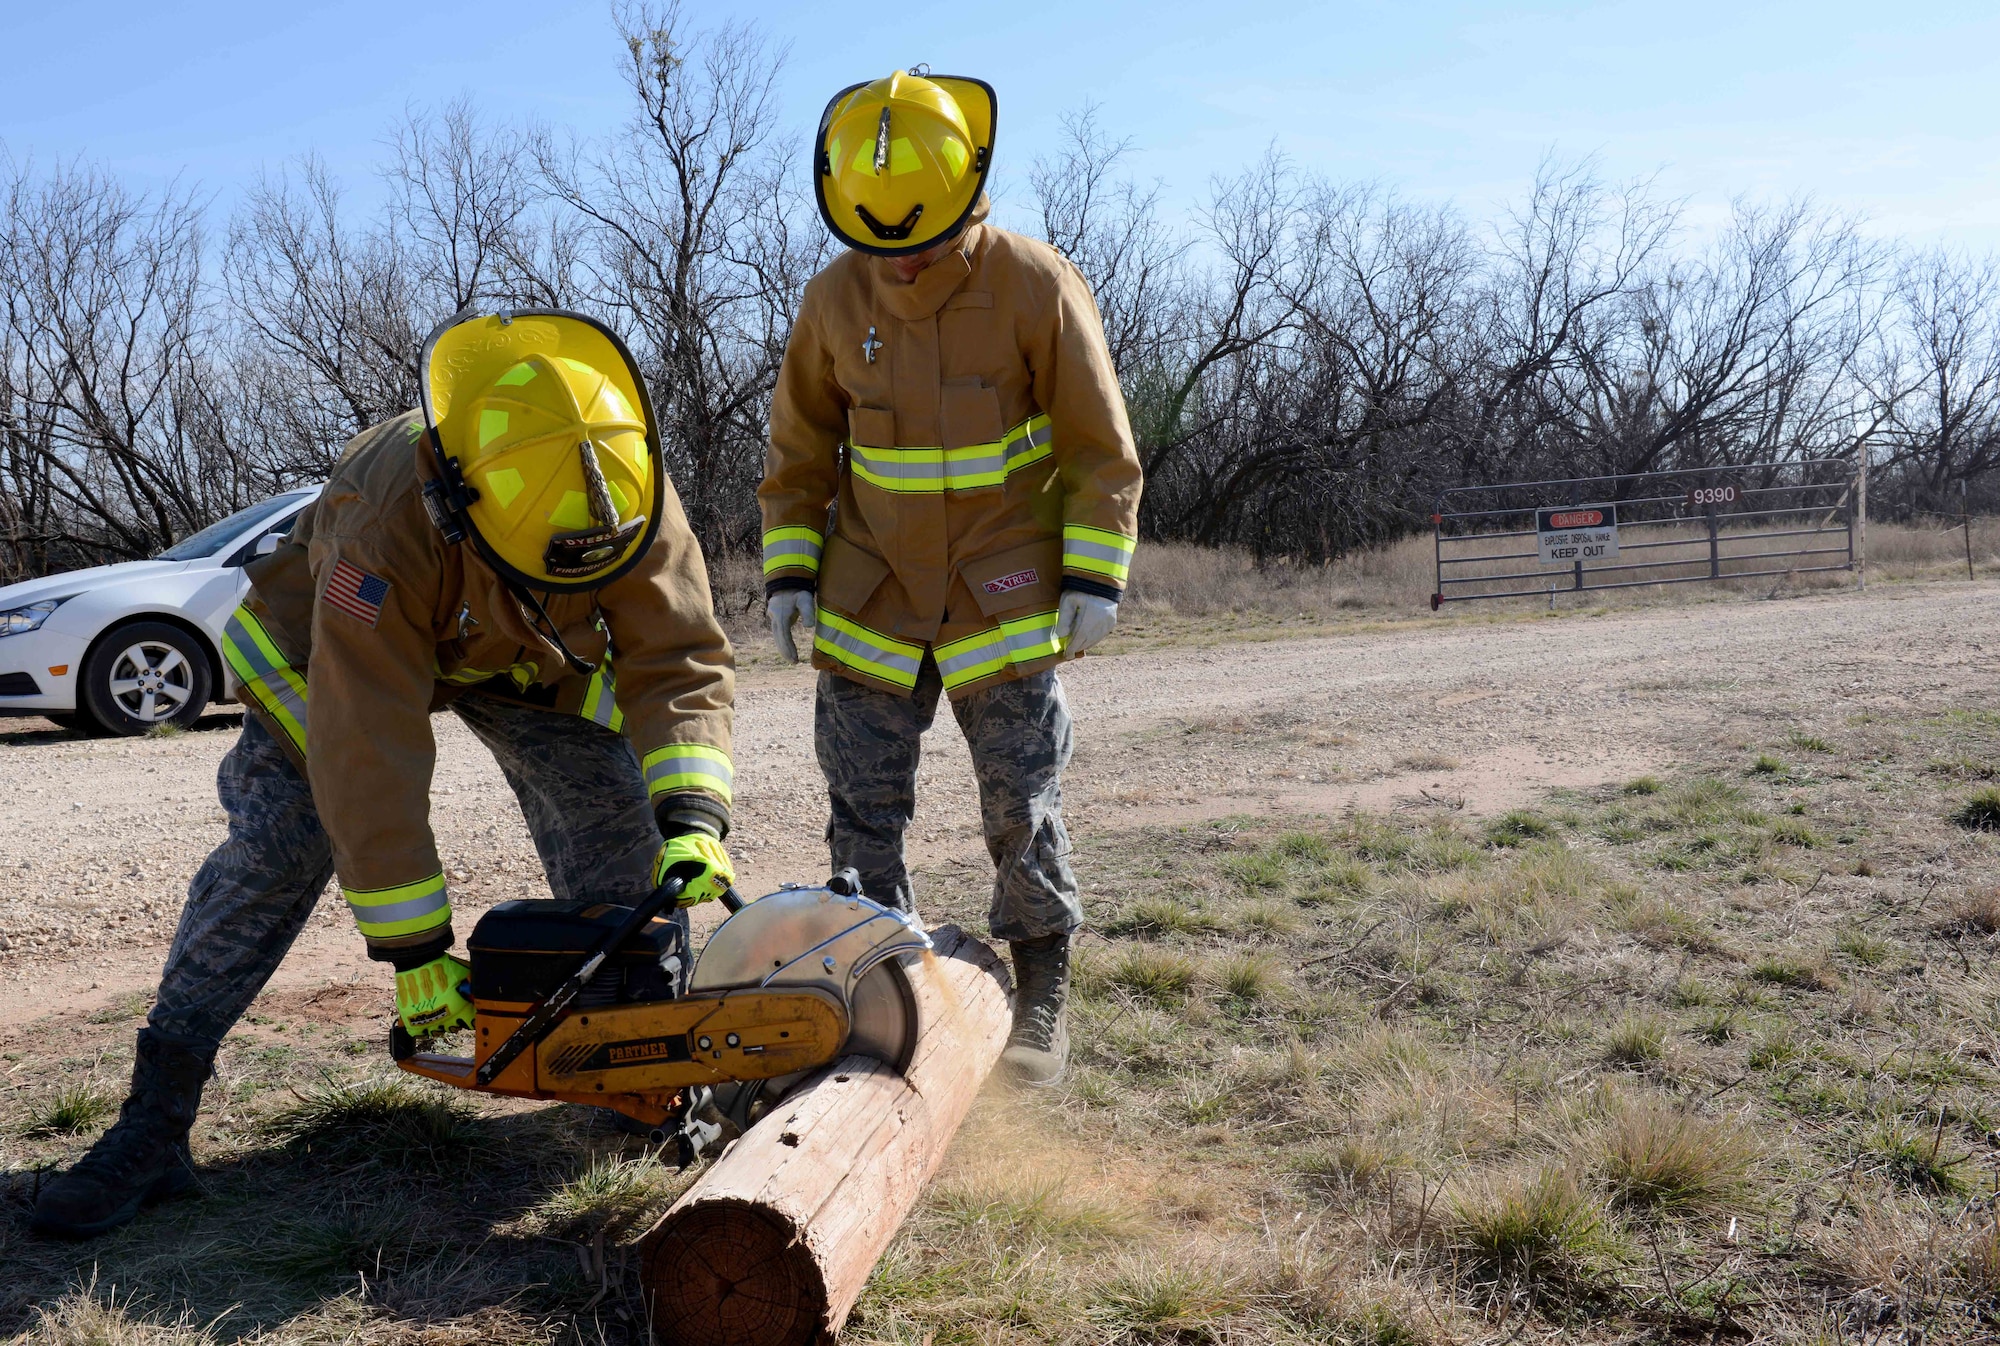 U.S. Air Force Airman 1st Class Colt Nix, 7th Civil Engineer Squadron firefighter, gets training on how to cut with a K-12 saw at Dyess Air Force Base, Texas, Feb. 2, 2017. The Dyess fire department use logs to train new Airmen on how to properly use the rescue saw. This tool is used for rooftop ventilation, a process in which a hole is cut into the roof of a burning building which allows smoke to escape. (U.S. Air Force photo by Airman 1st Class Austin Mayfield)